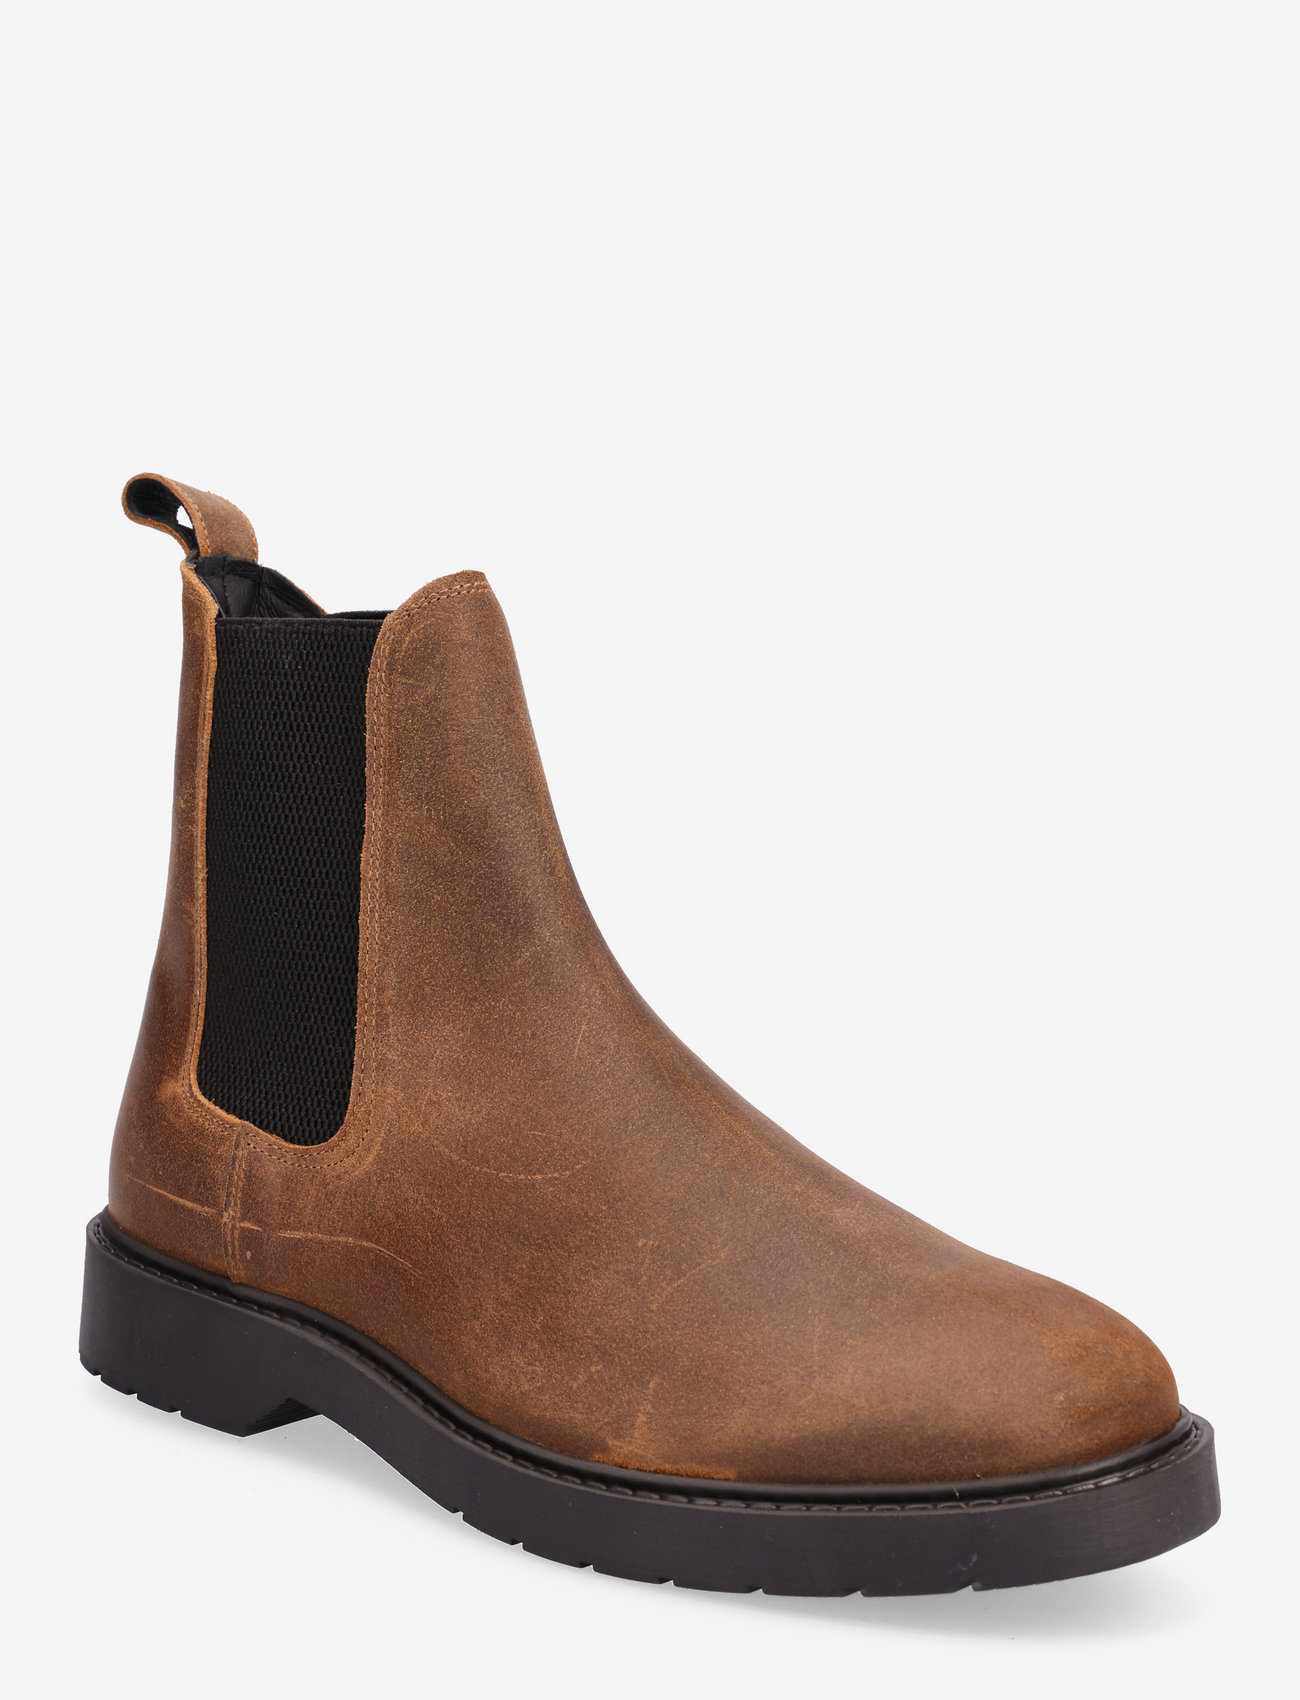 Selected Homme - SLHTIM SUEDE CHELSEA BOOT B - birthday gifts - tobacco brown - 0